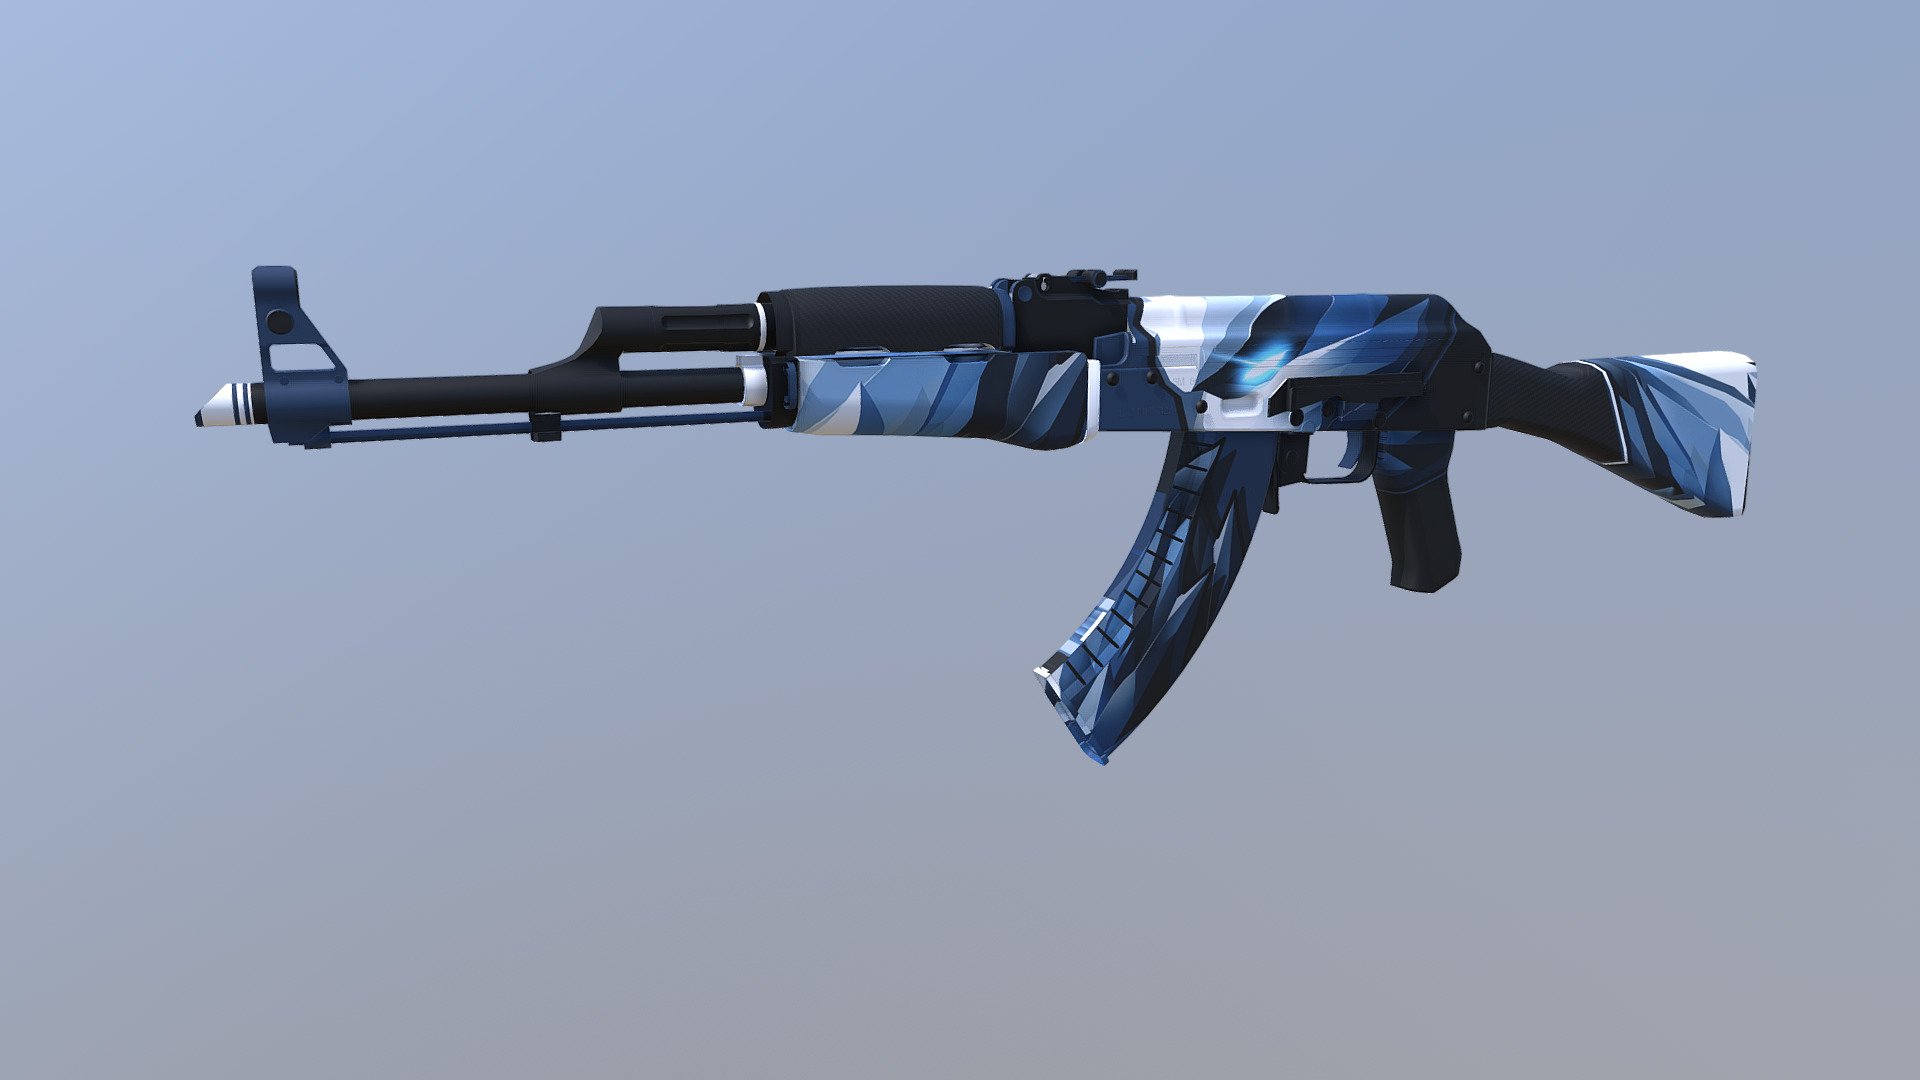 AK47 Ice skin, really love this looks.
added carbon for more awesomeness lol - Ice Collection Ak47 Vol 1.0 - 3D model by NorGlace (@glaciuscreations) 3d model